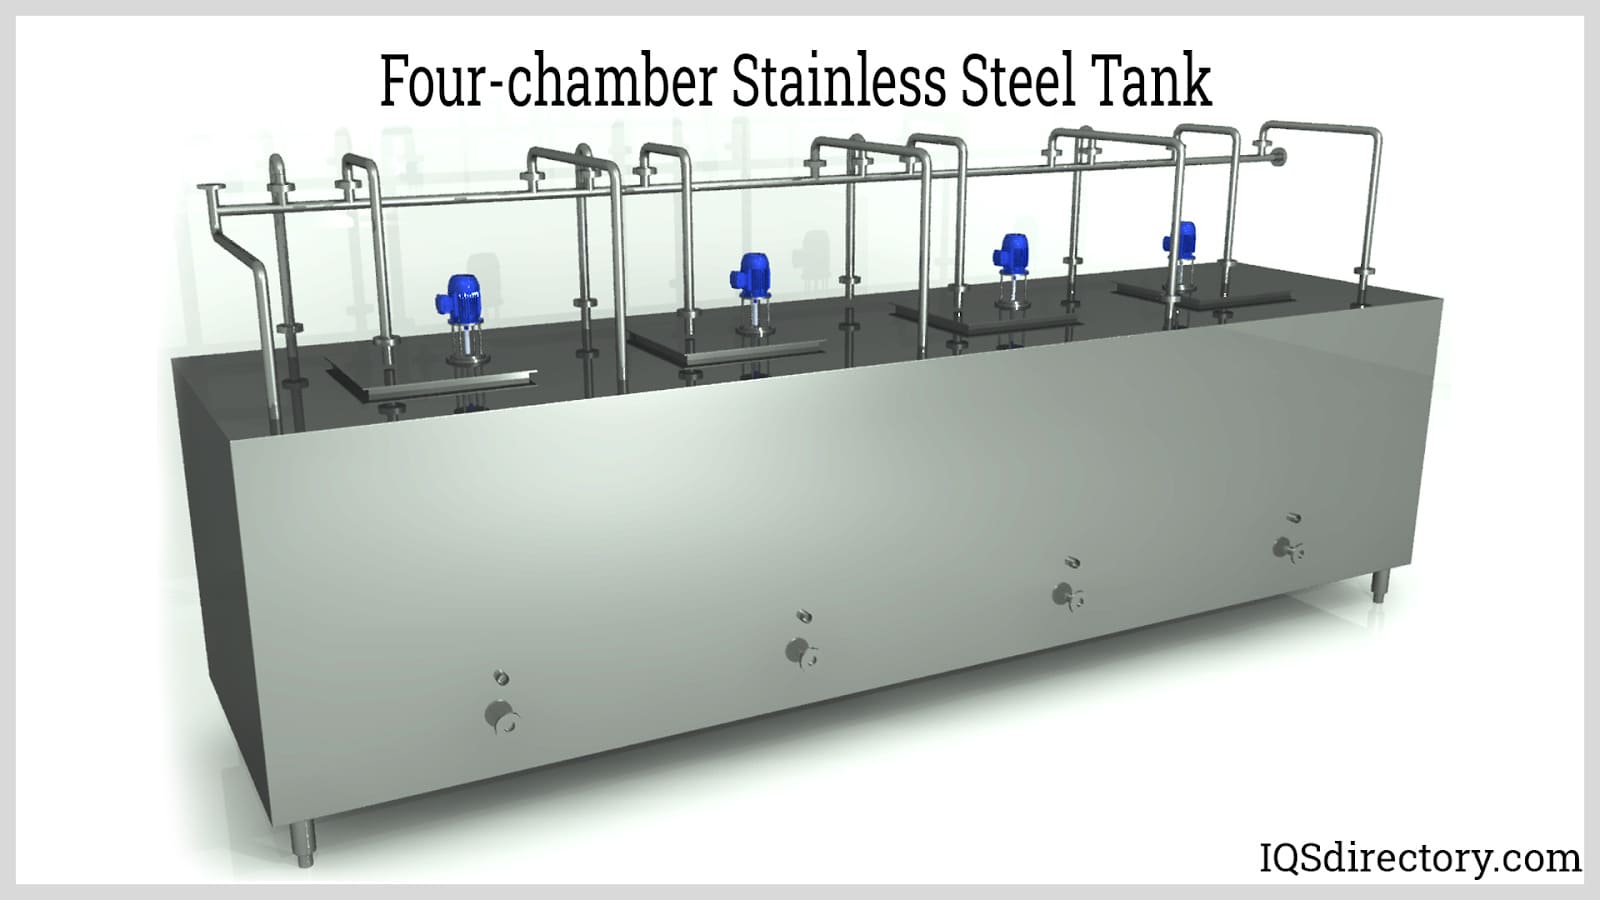 Four-chamber Stainless Steel Tank